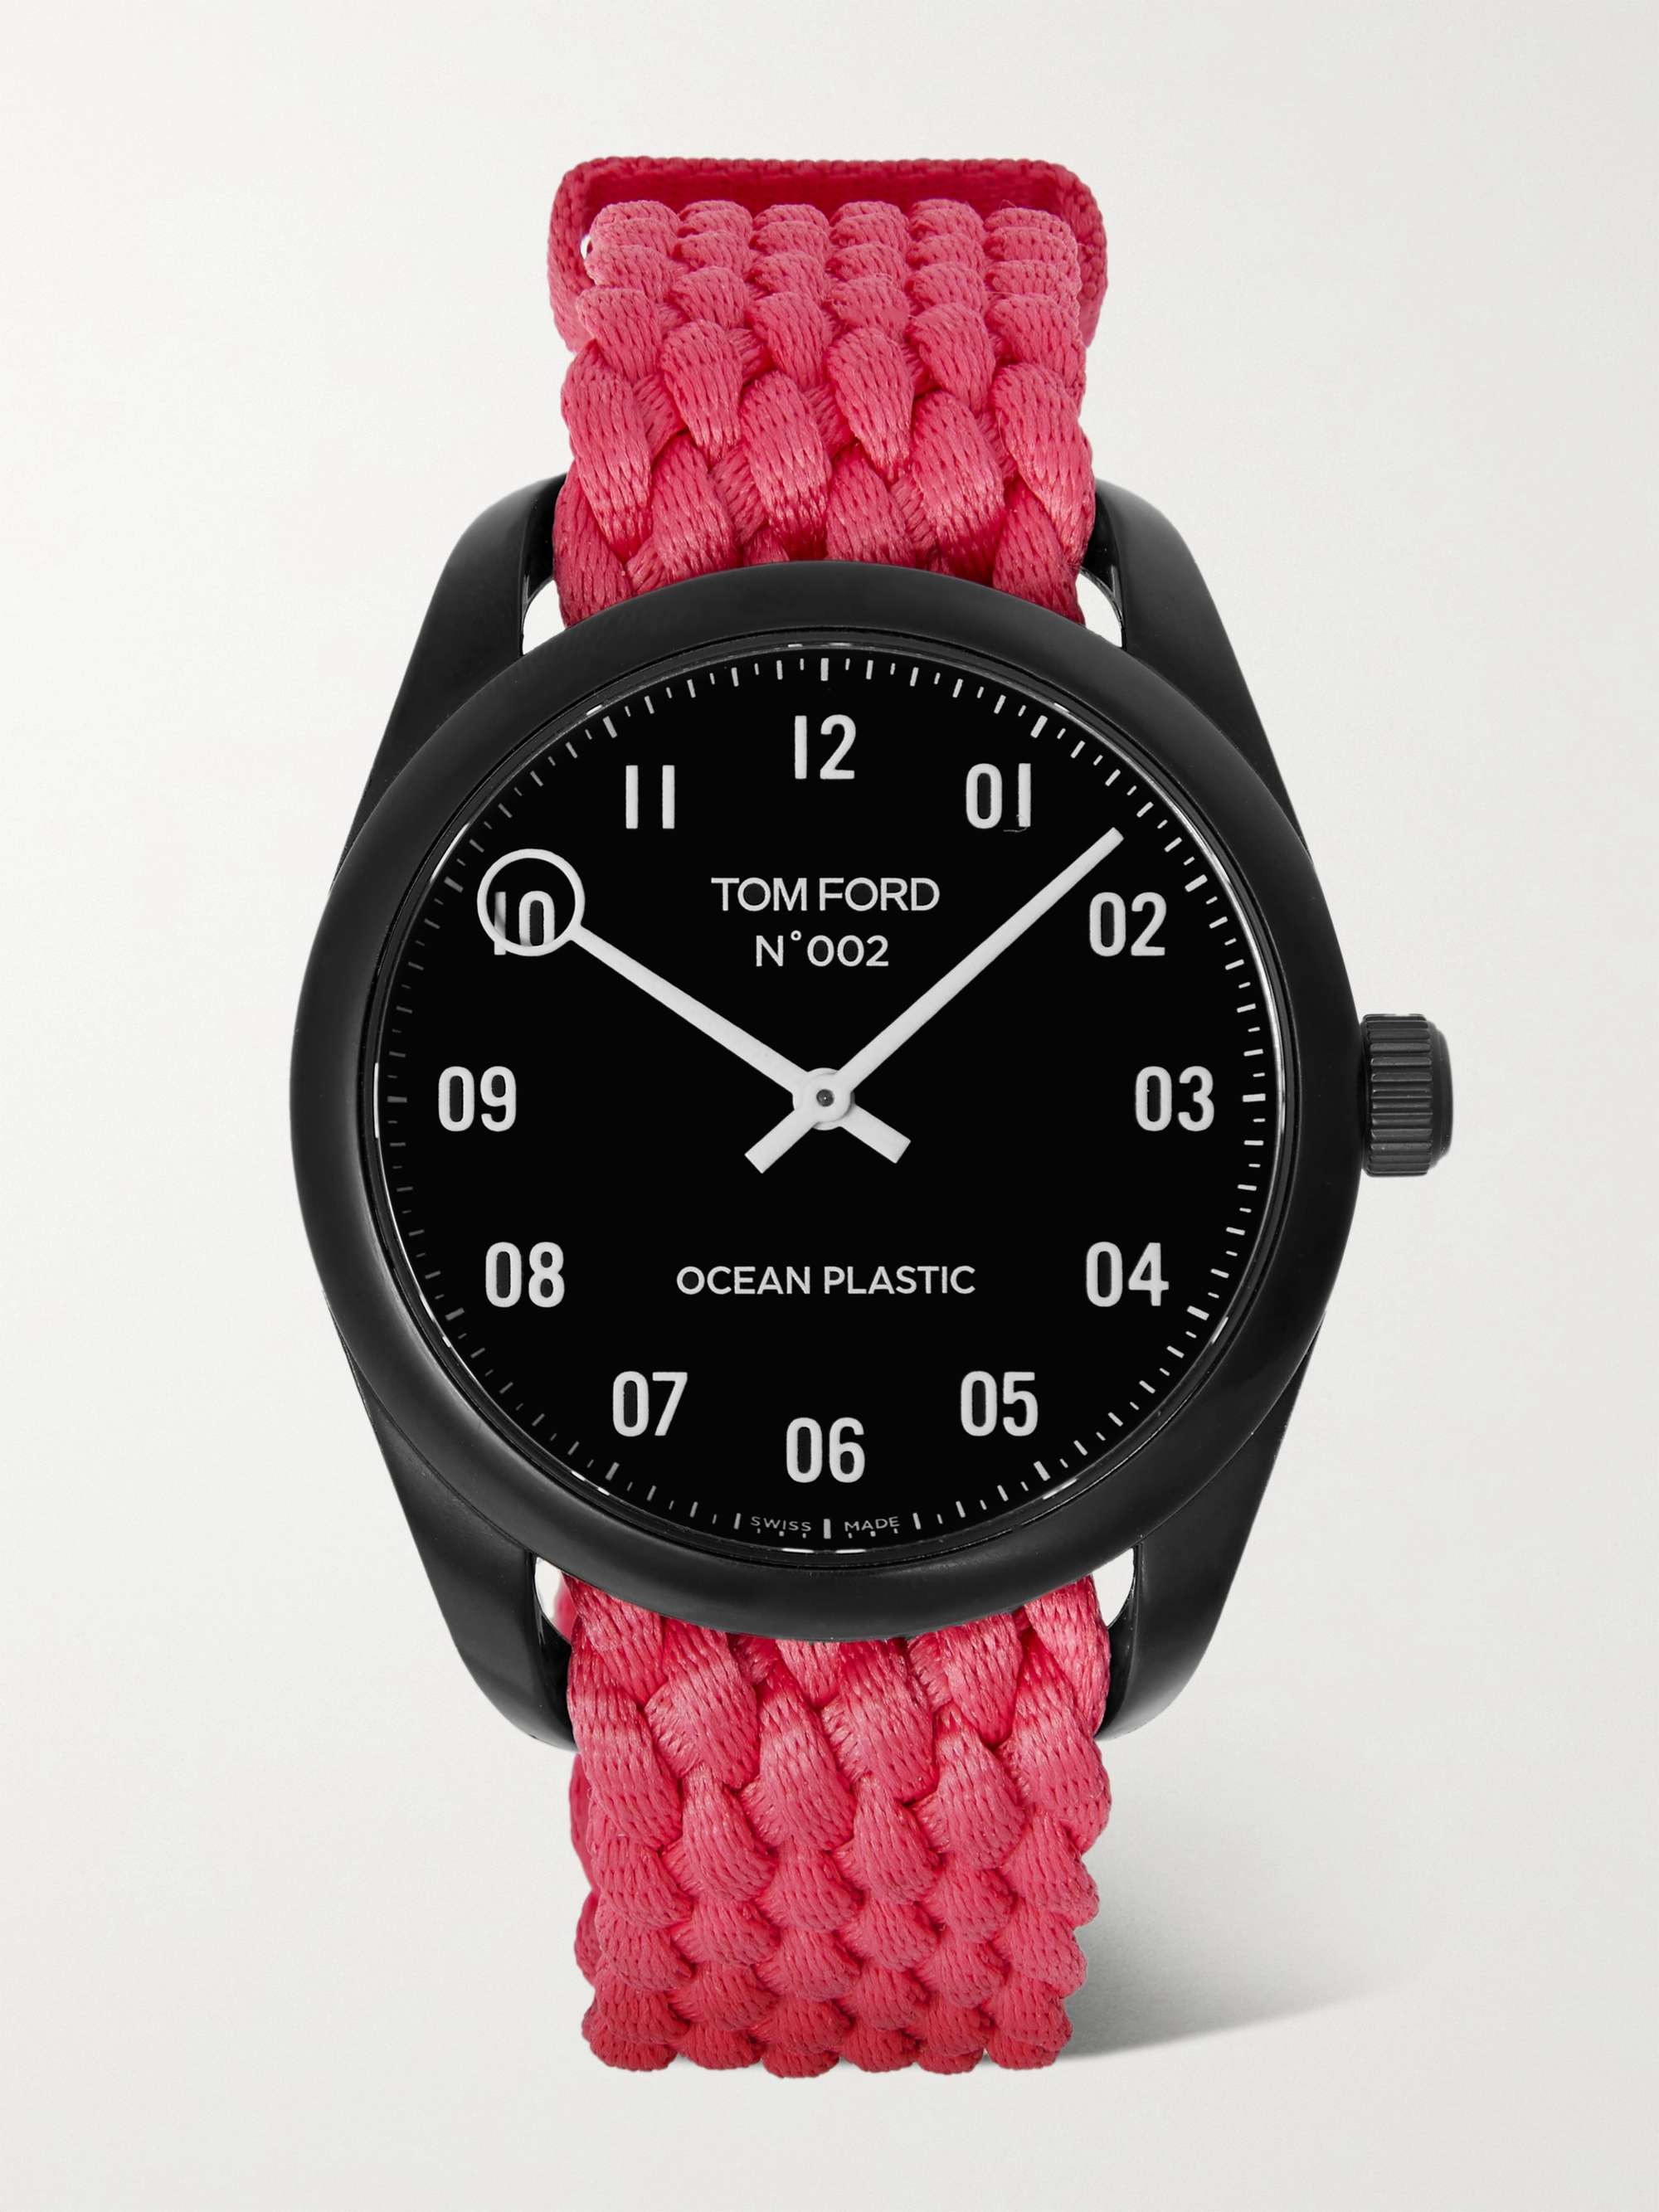 TOM FORD TIMEPIECES 002 40mm Ocean Plastic Watch